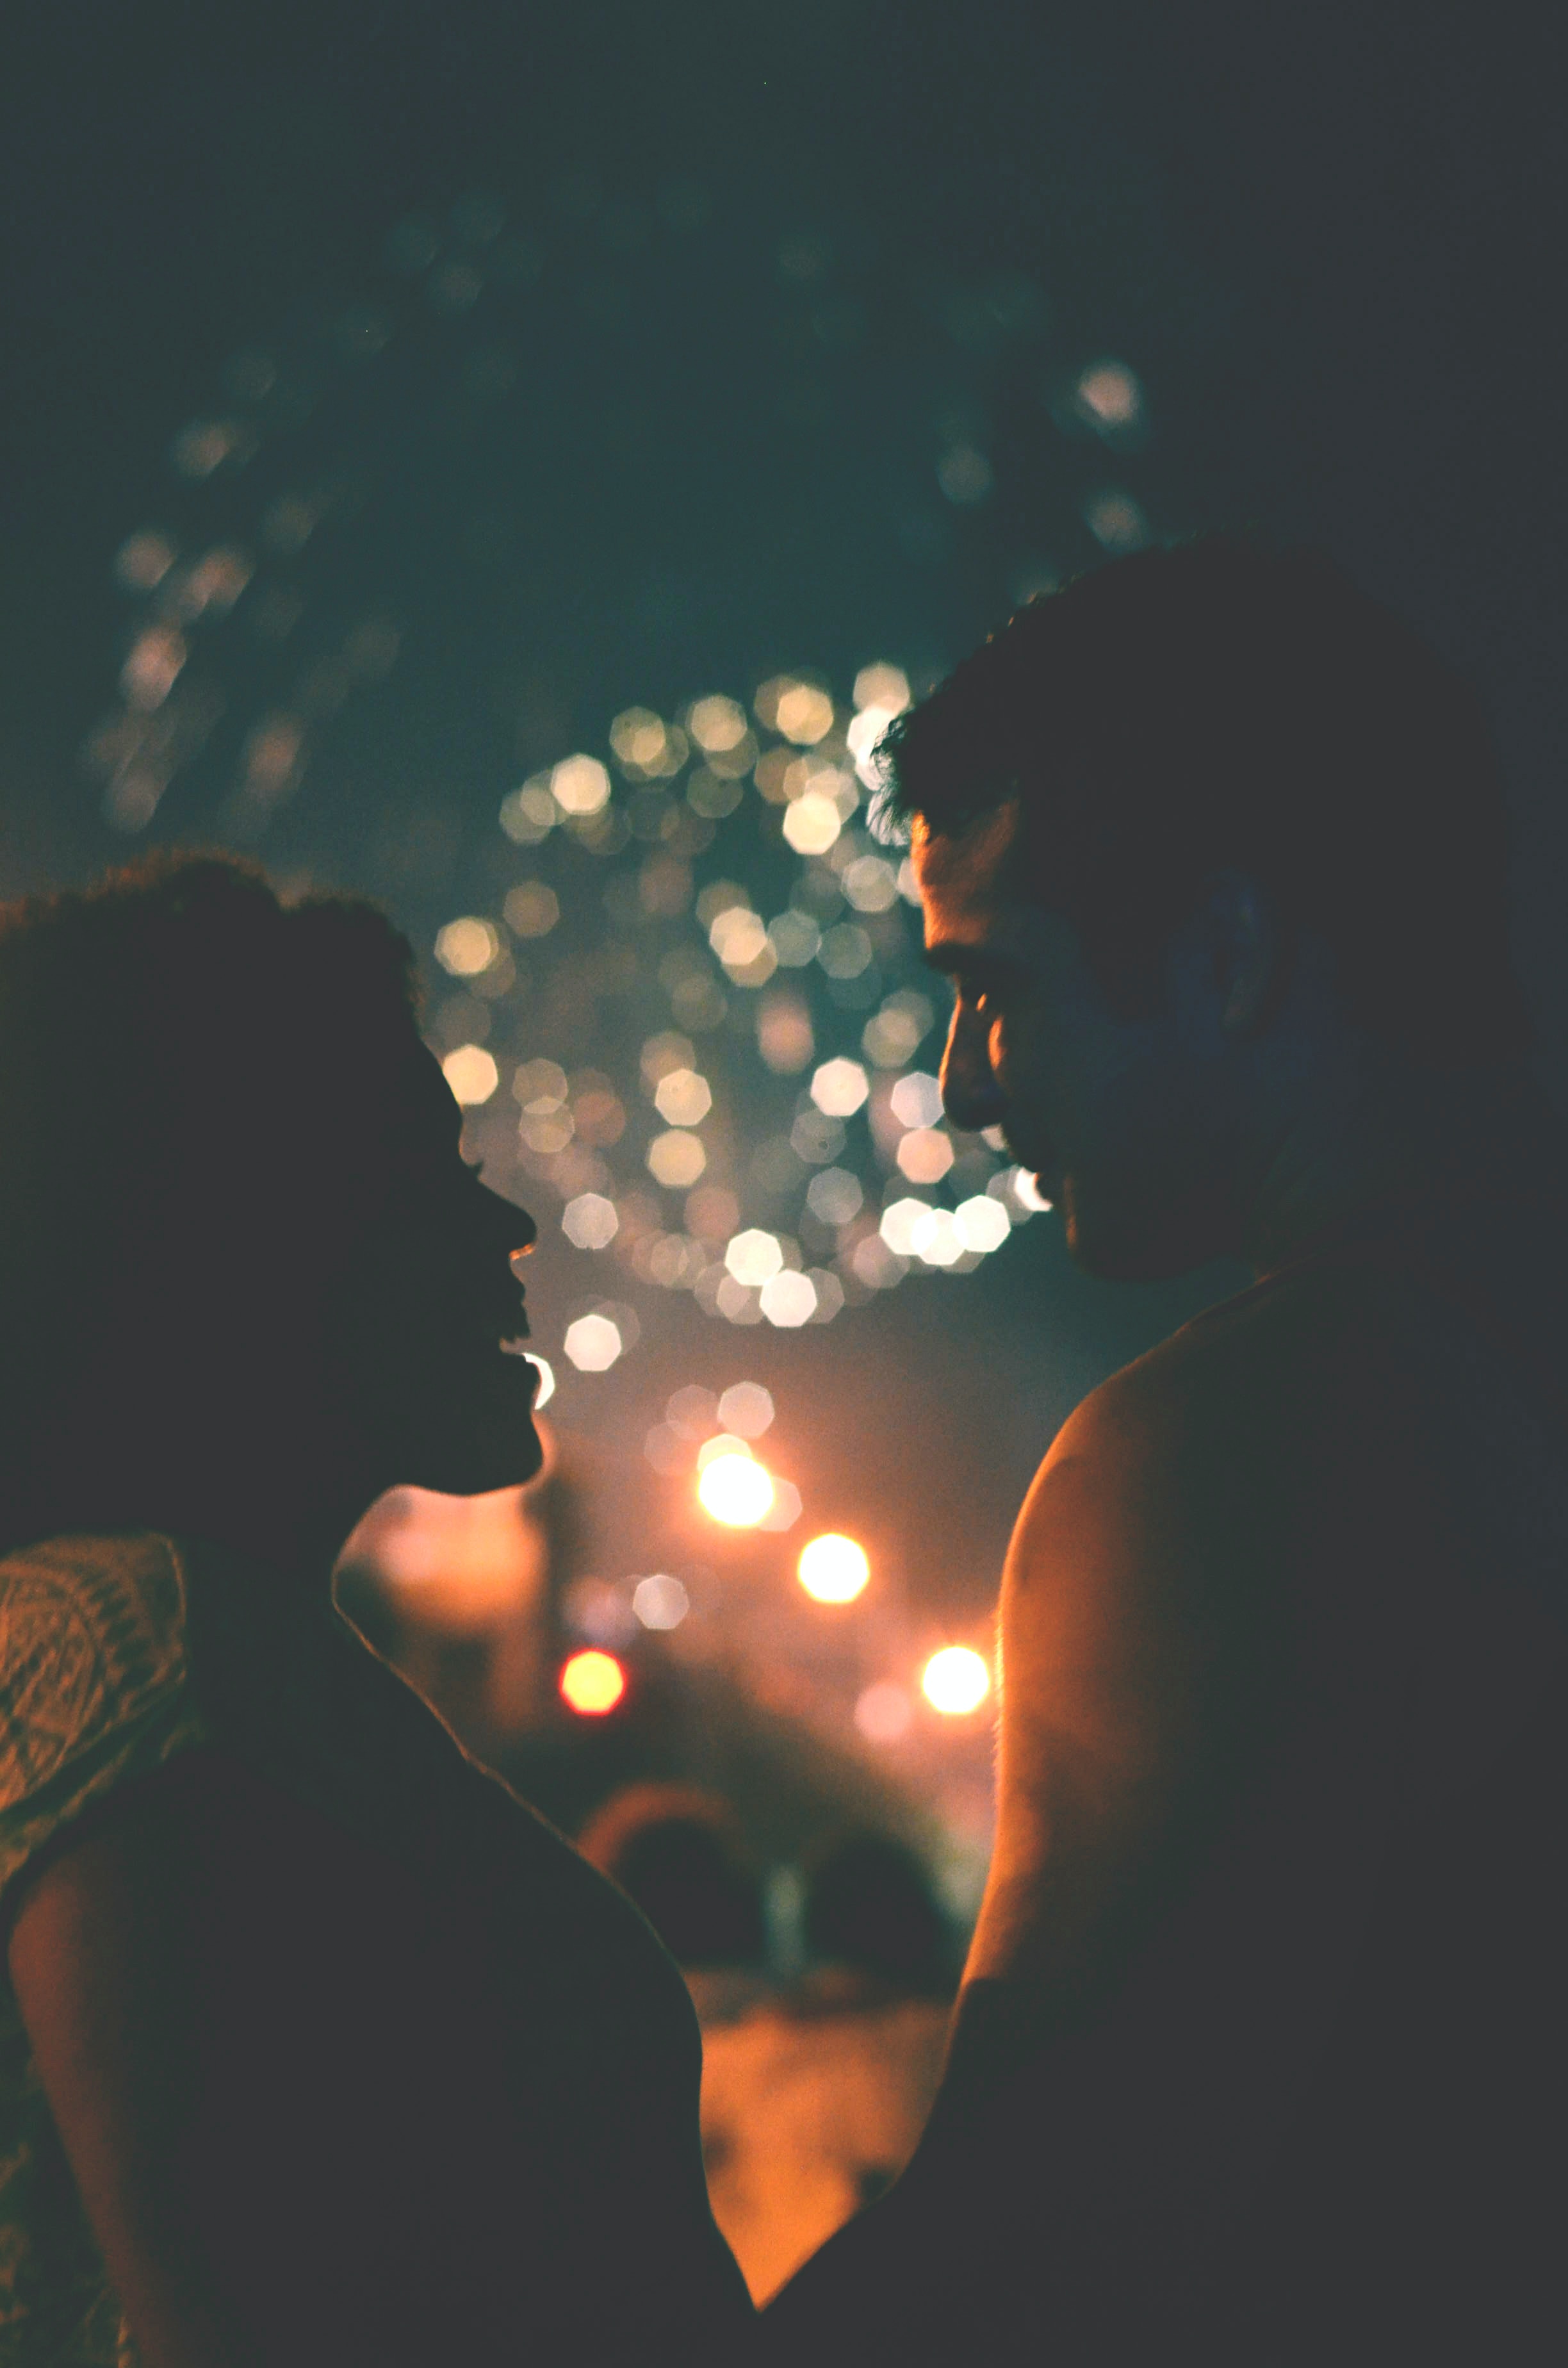 A couple with fireworks in the background. | Source: Unsplash